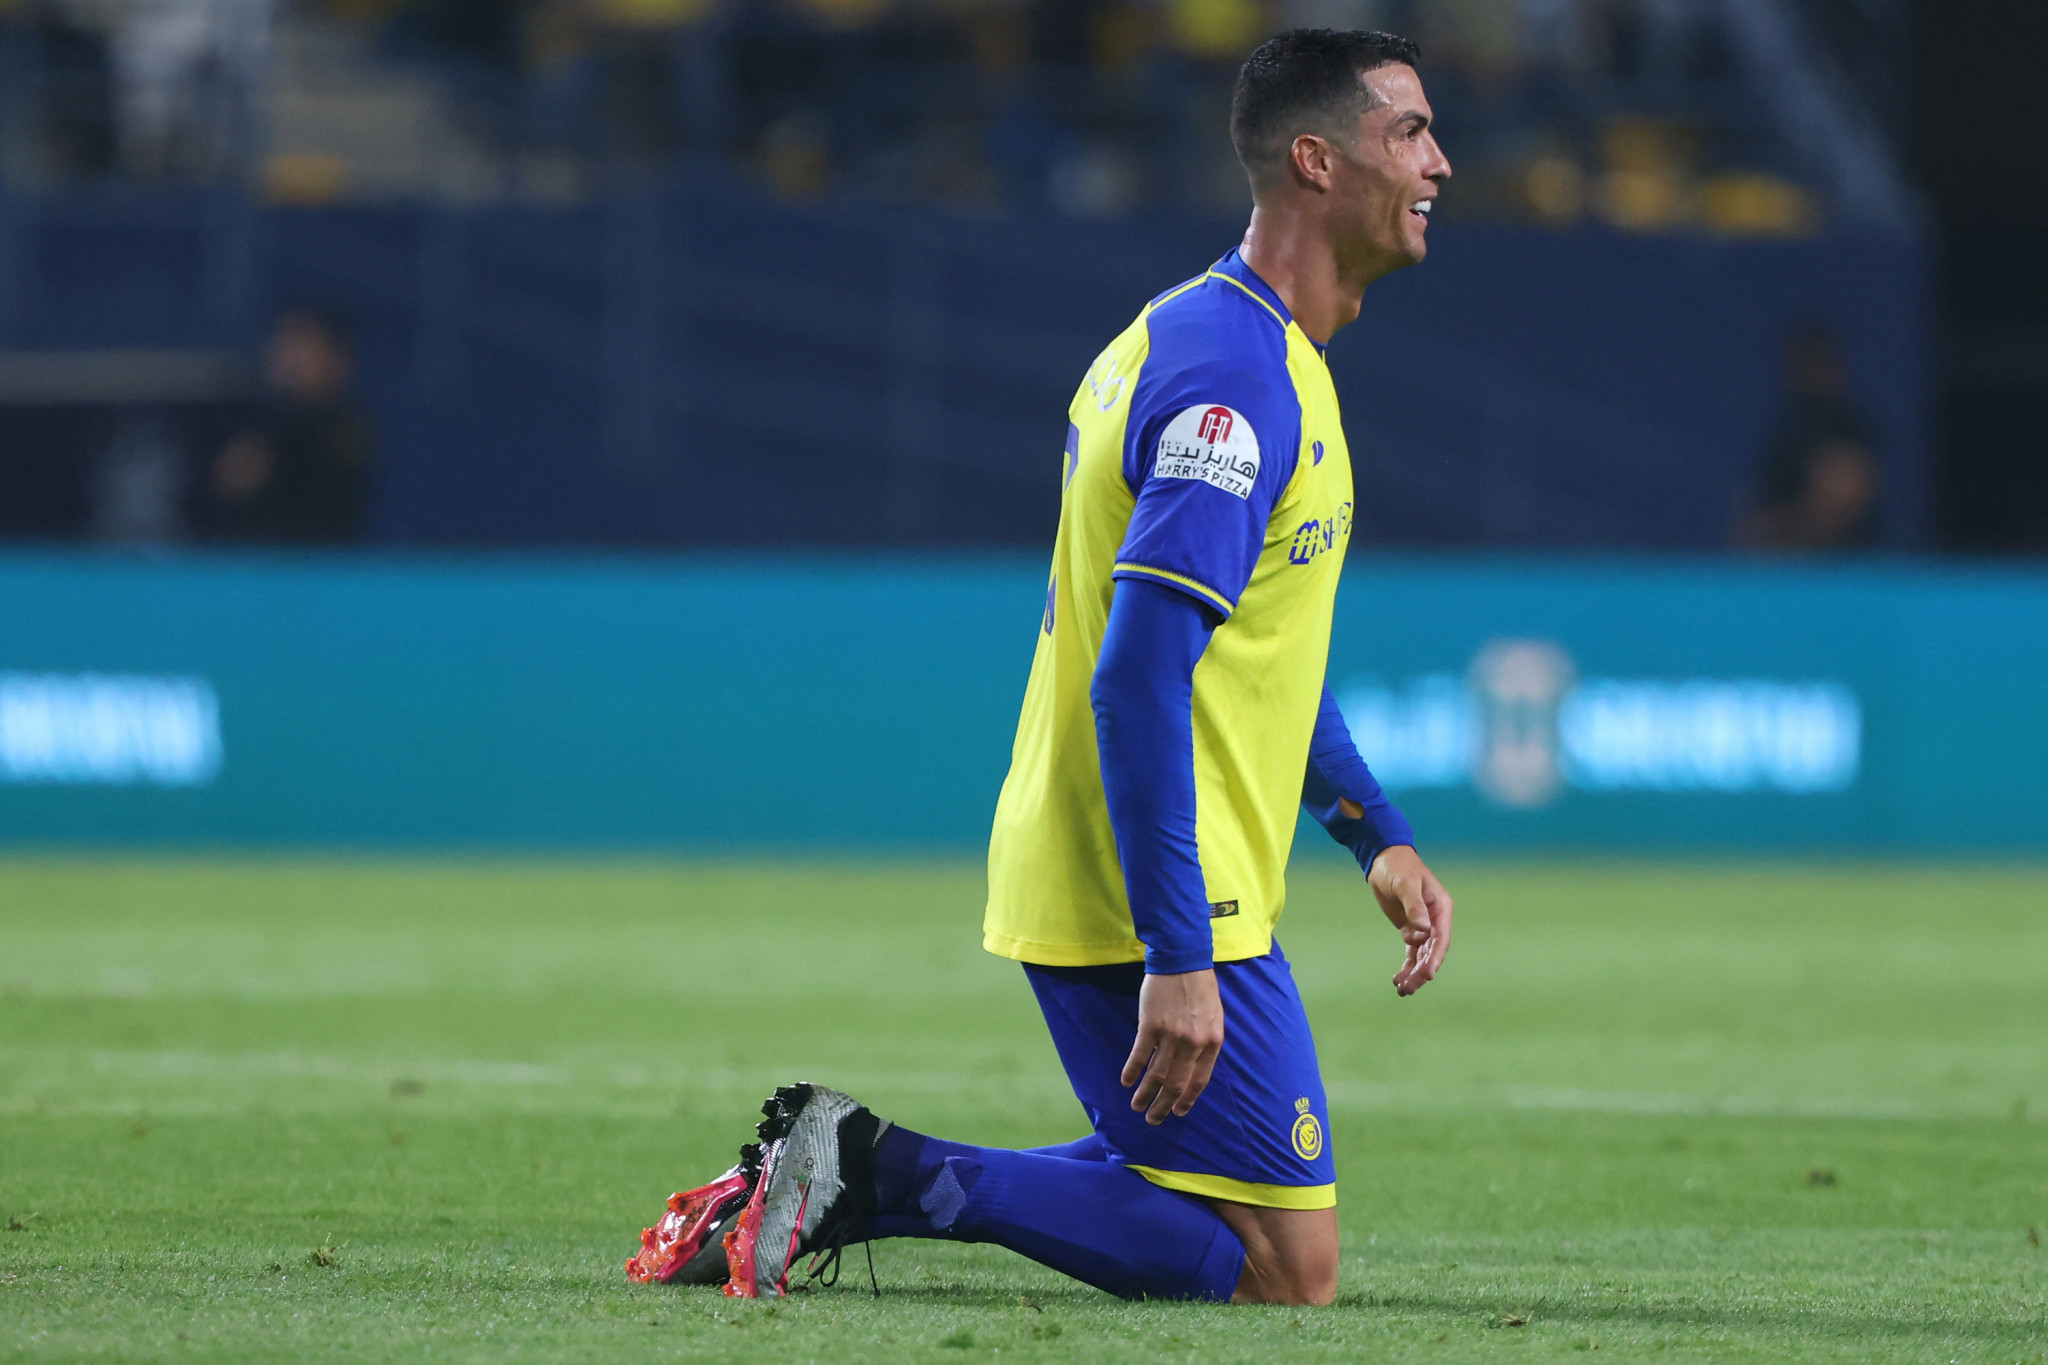 Five-time Ballon d'Or winner Cristiano Ronaldo of Portugal became one of the biggest stars to ply his trade in the Middle East when he joined Riyadh-based Al Nassr Football Club last year ©Getty Images